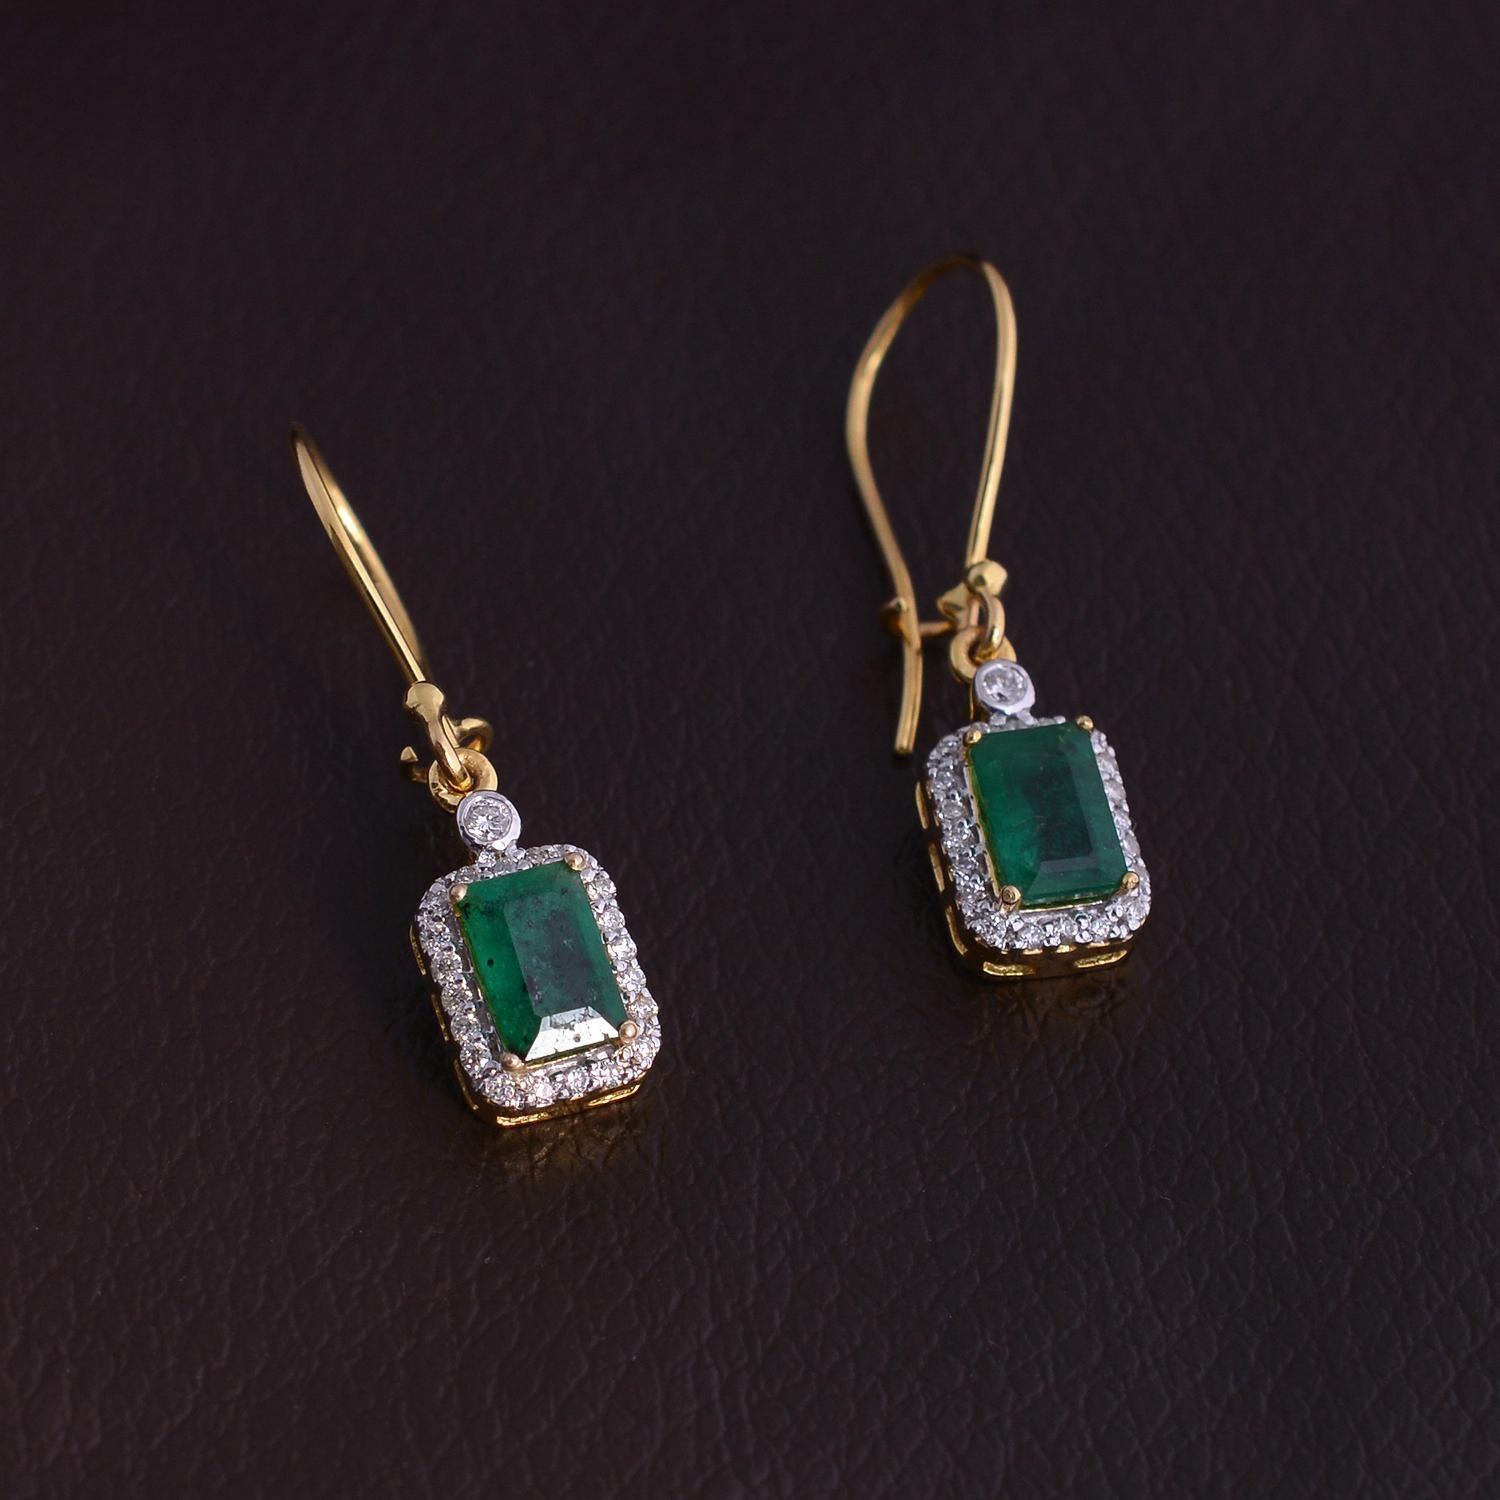 Impressive emerald gemstone dangle earrings set in 14kt yellow gold with natural diamonds.  A perfect addition to any ensemble.  

Specifications

Dimensions: 30X7 MM
Gross Weight: 2.61 gms
Gold Weight: 2.98 gms
Gold Purity: 14K Yellow Gold
Diamond